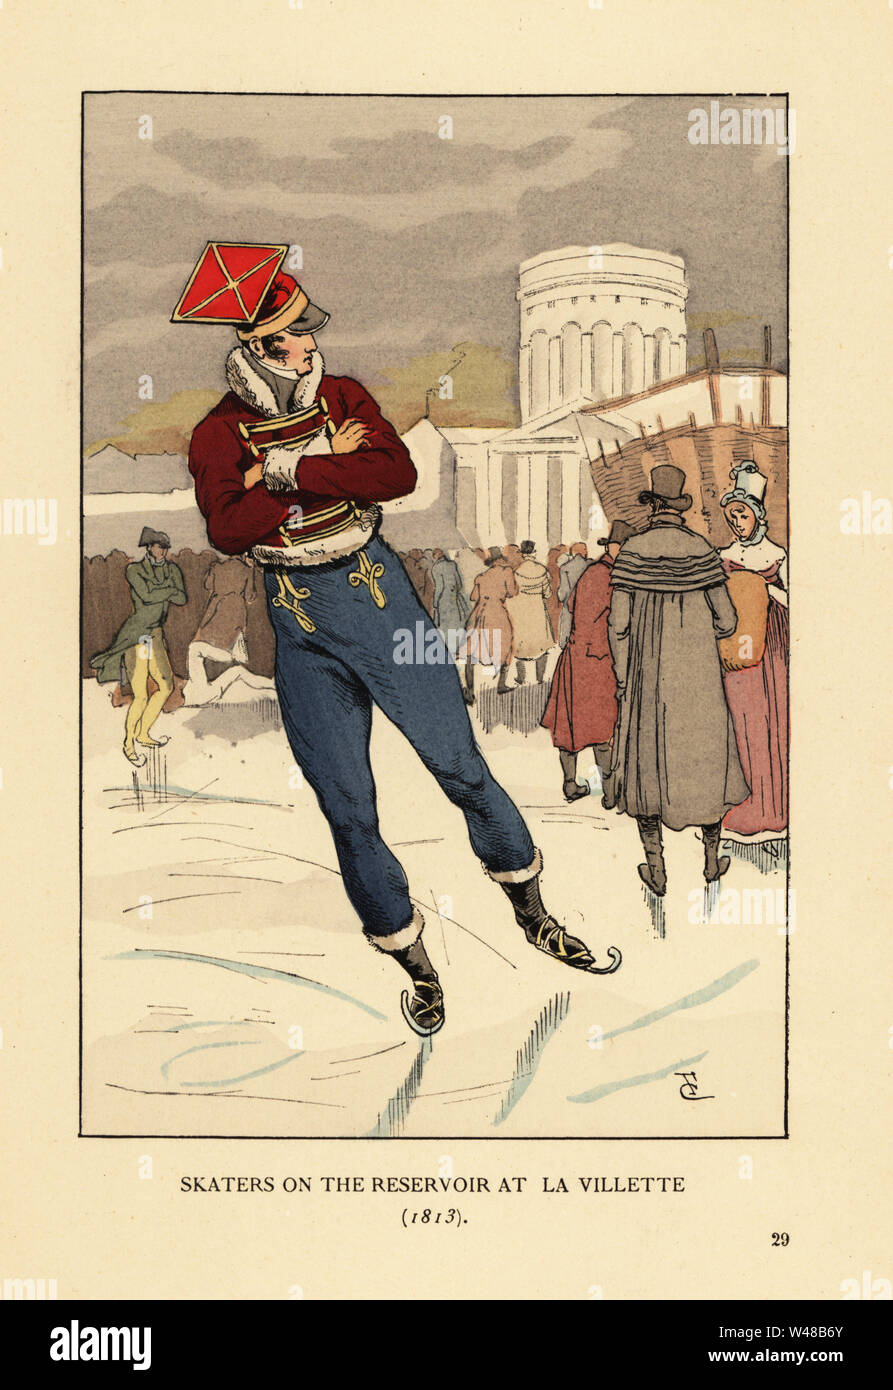 Lancer and gentlemen ice skating on the Bassin de la Villette, Paris, 1813. Skaters on the reservoir at La Villette, Soldier in uniform of the Polish lancers of the Imperial Guard with czapka headdress.  Handcoloured lithograph by R.V. after an illustration by Francois Courboin from Octave Uzanne’s Fashion in Paris, William Heinemann, London, 1898. Stock Photo